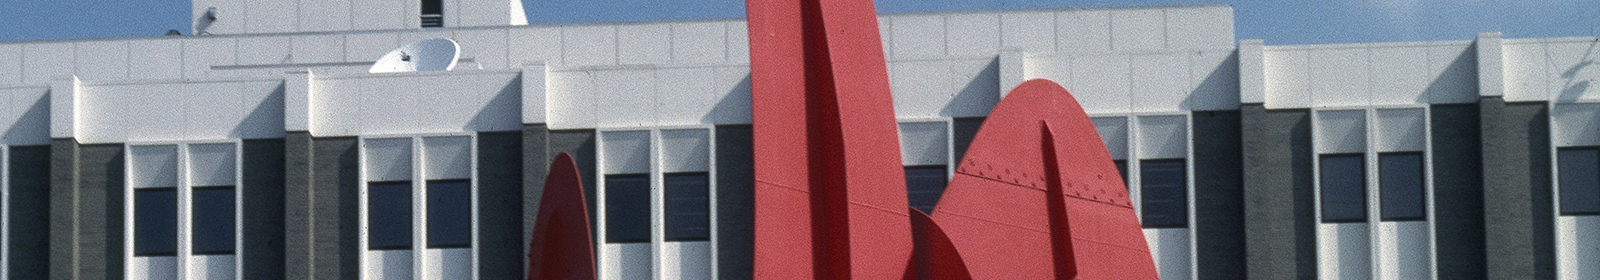 Photograph of an abstract red metal shape in front of a building